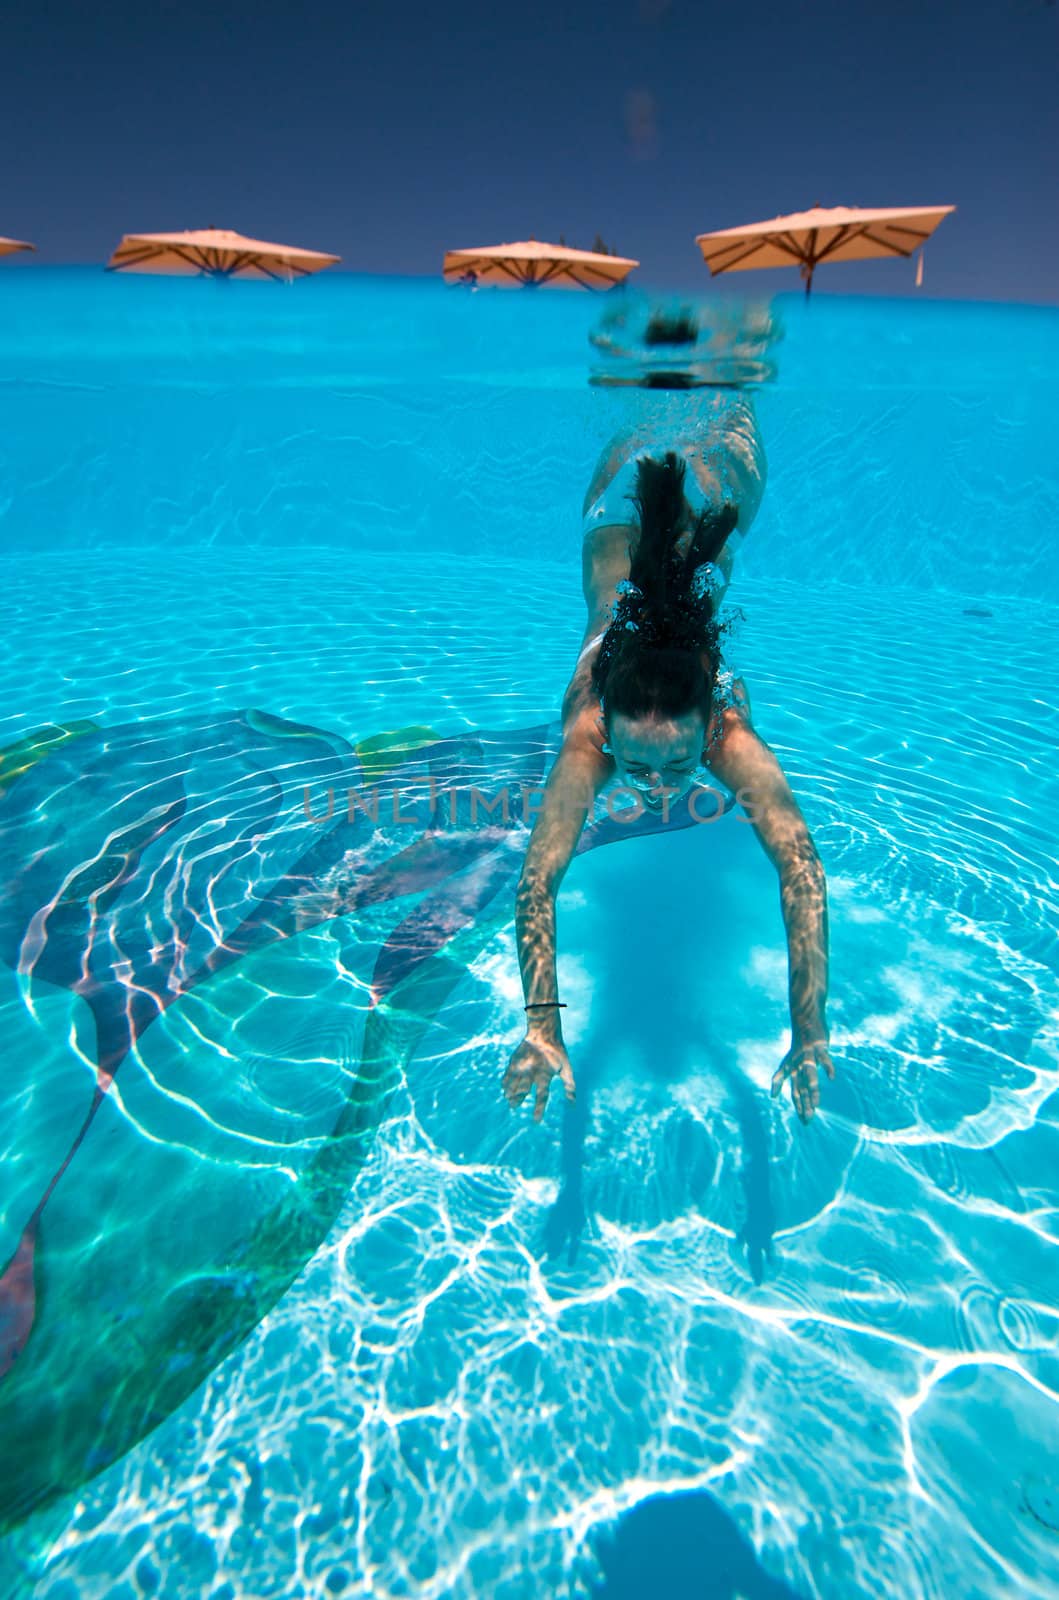 Underwater view of a woman swimming in the swimming pool